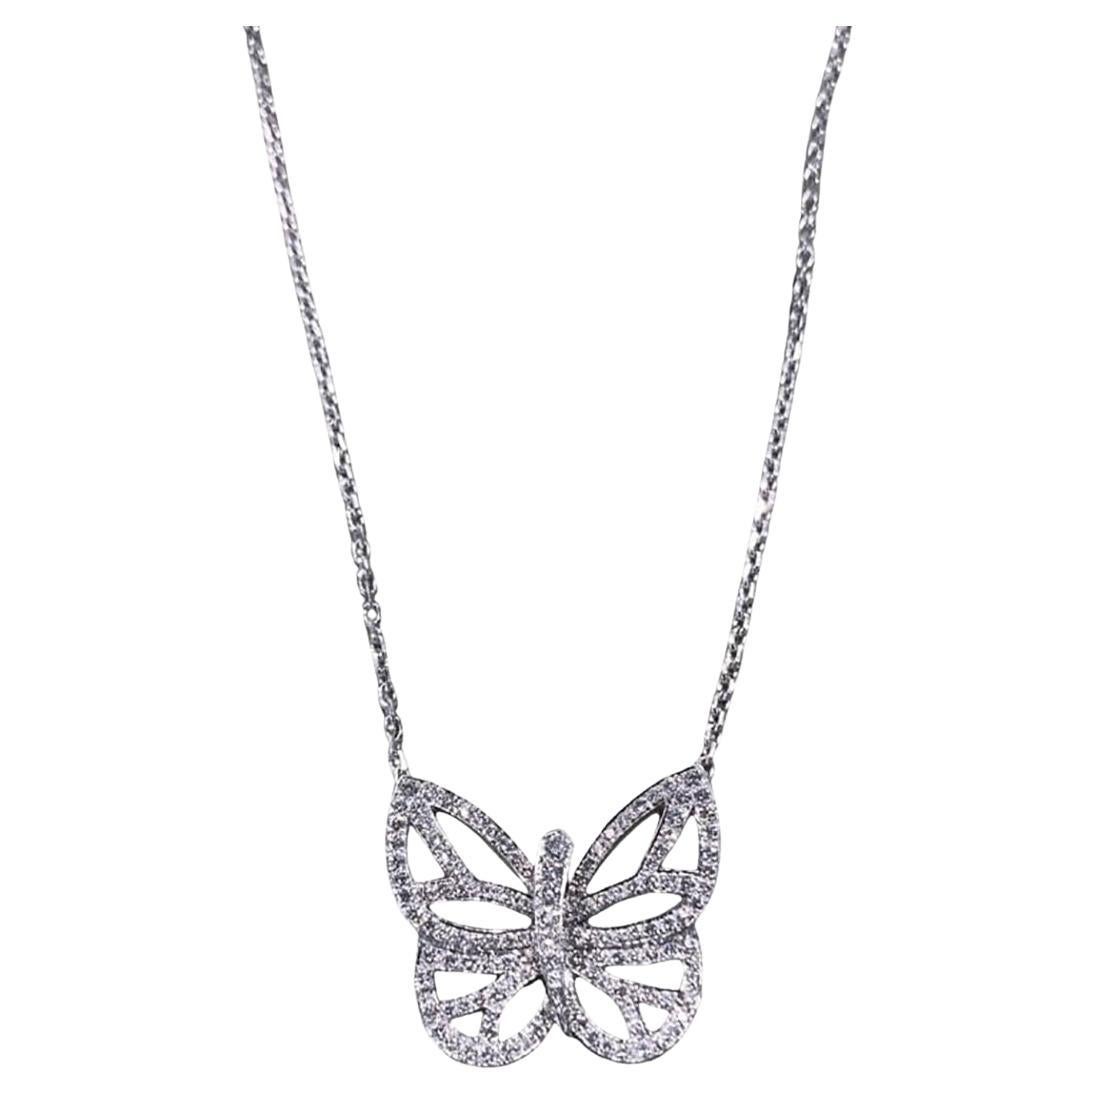 Van Cleef & Arpels Flying Beauty Pendant Necklace in 18k White Gold and Diamonds